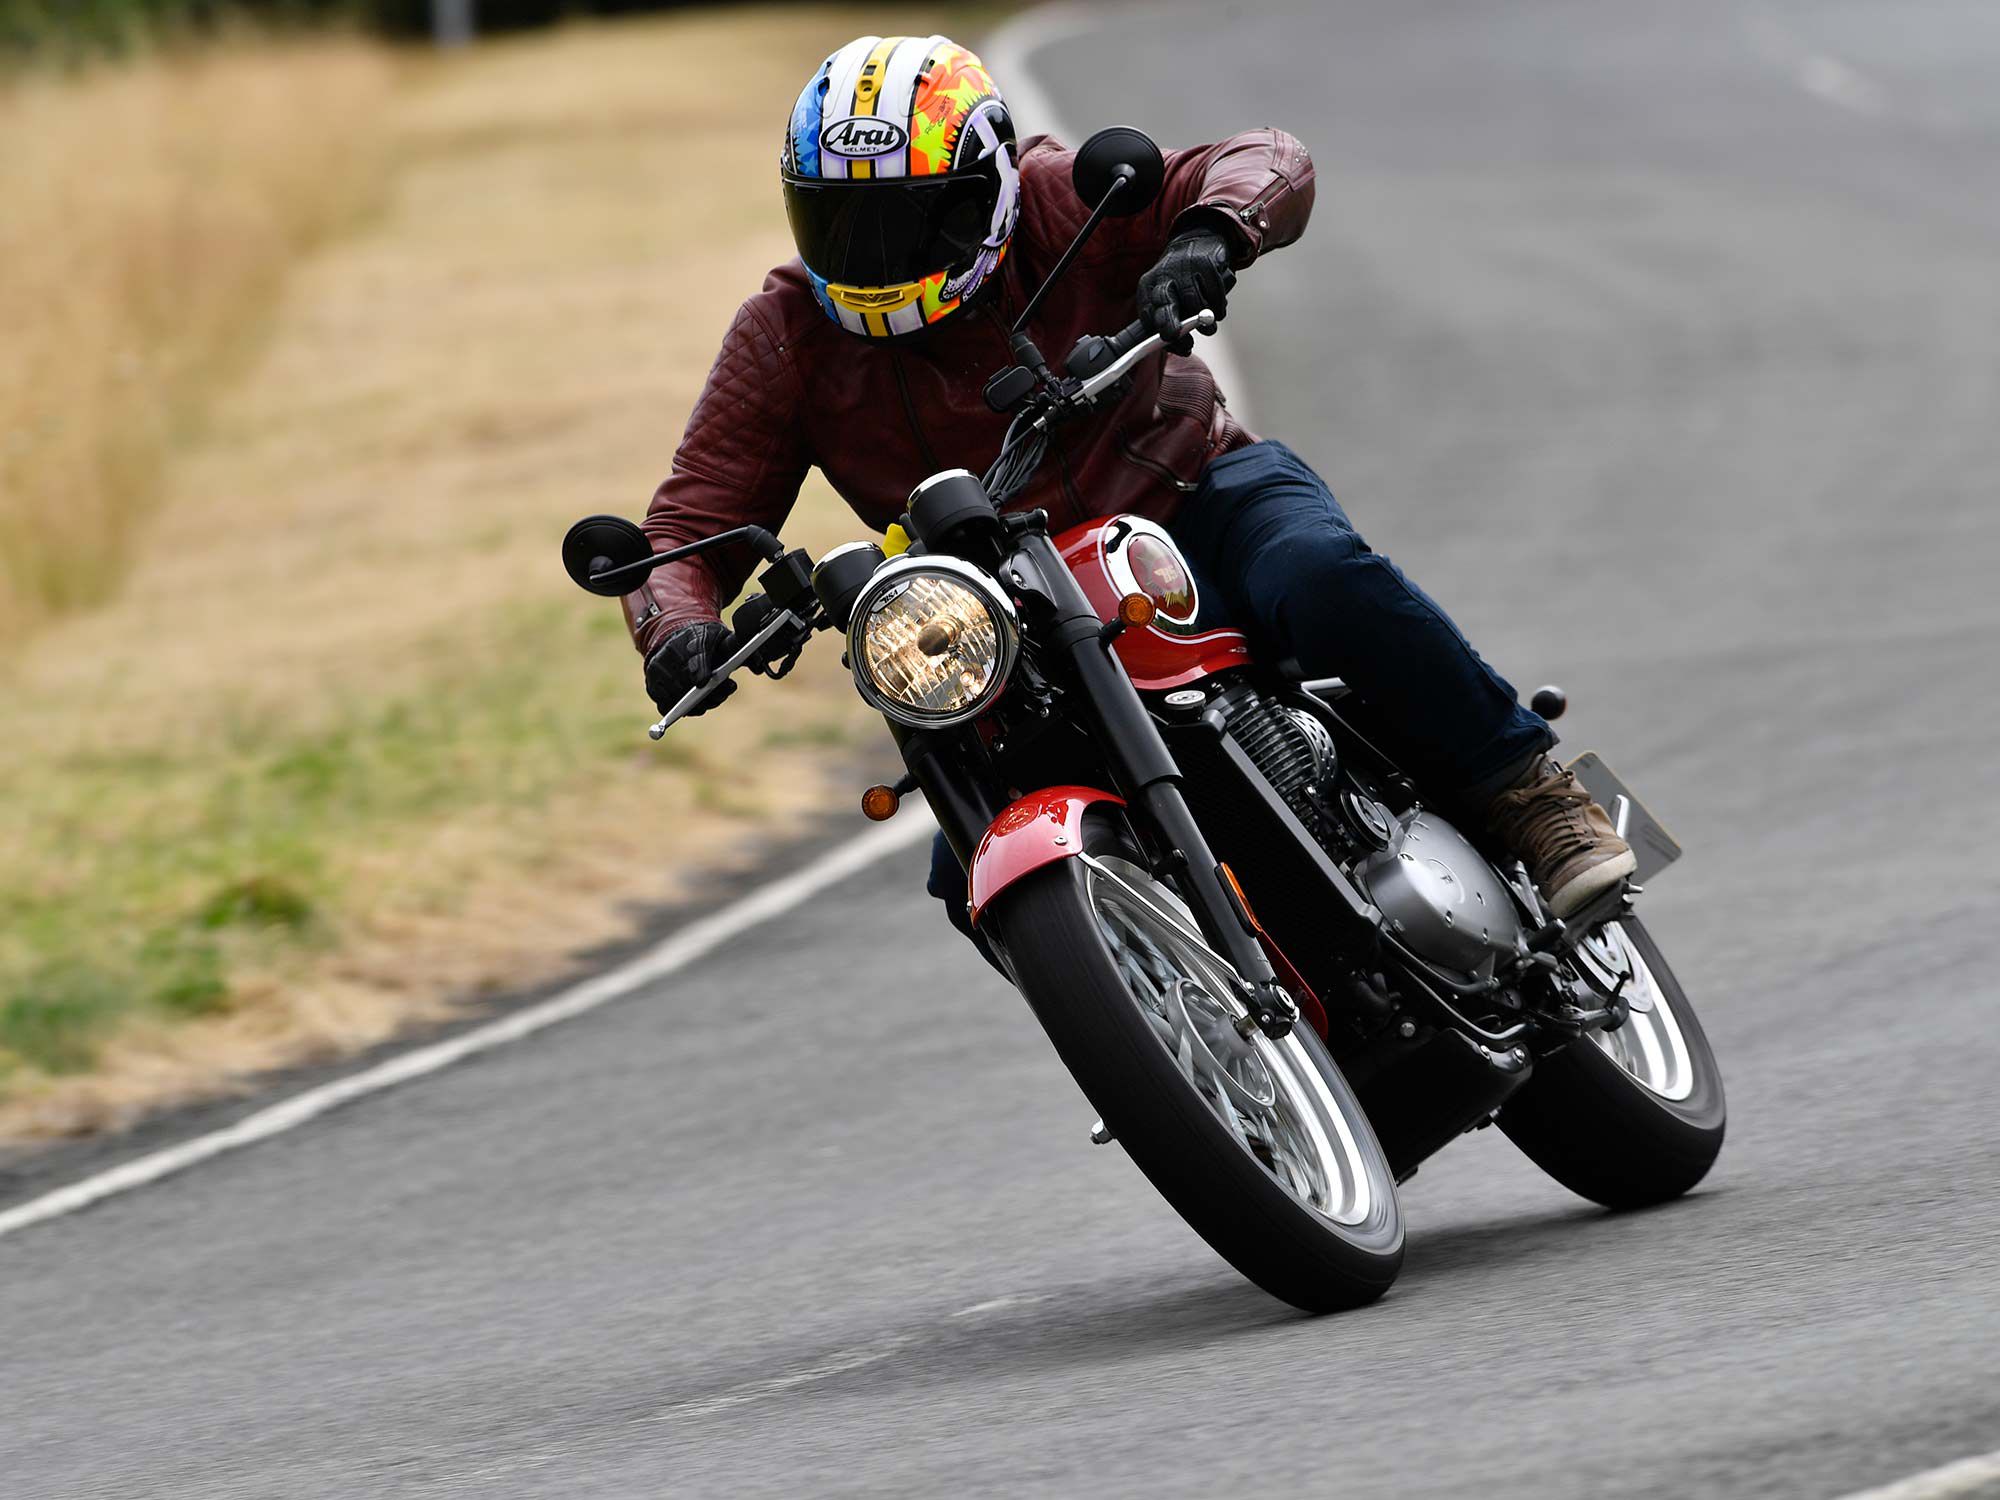 Our man got an exclusive ride on the new BSA Gold Star in England, where production will eventually be moved to (currently India).